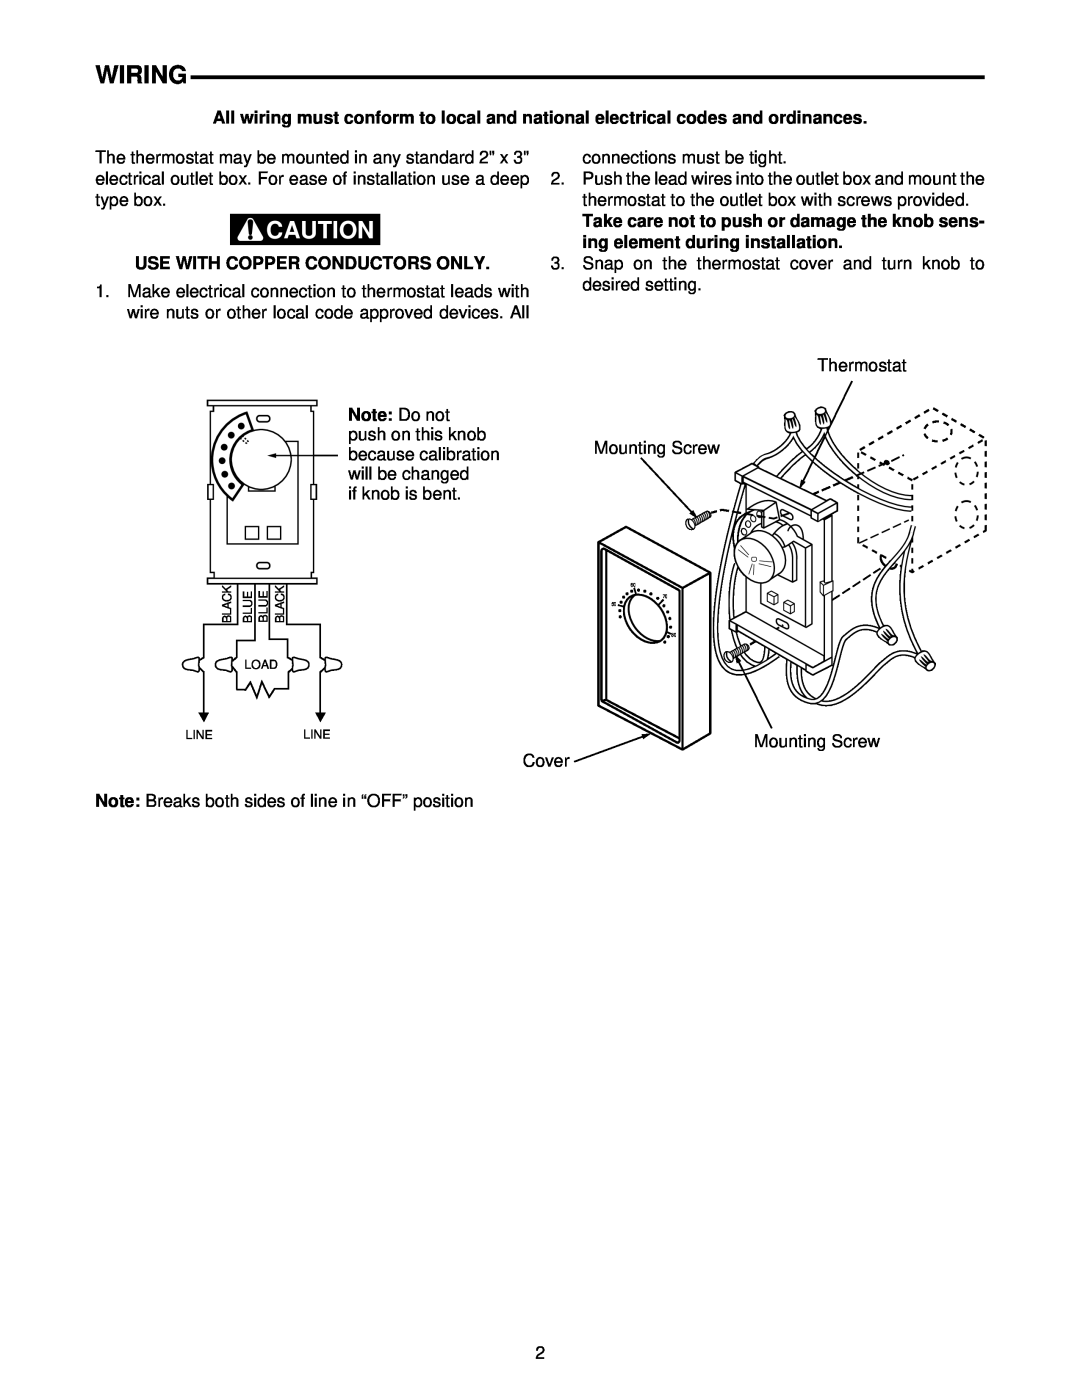 White Rodgers 37-5428c, 1A66W installation instructions Wiring 